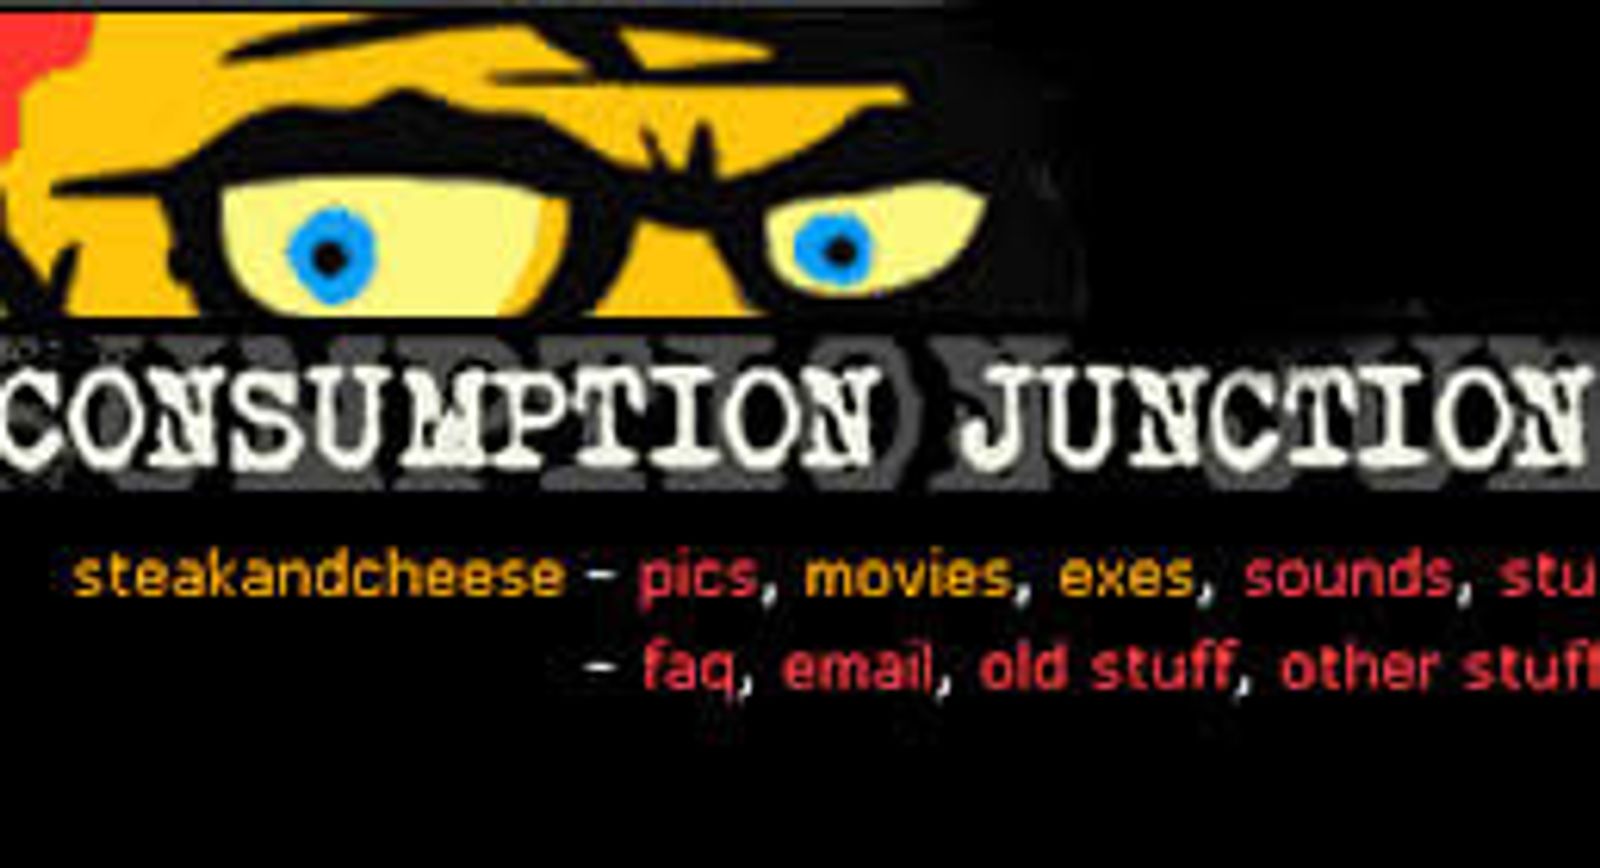 The Junction Orders Steak and Cheese